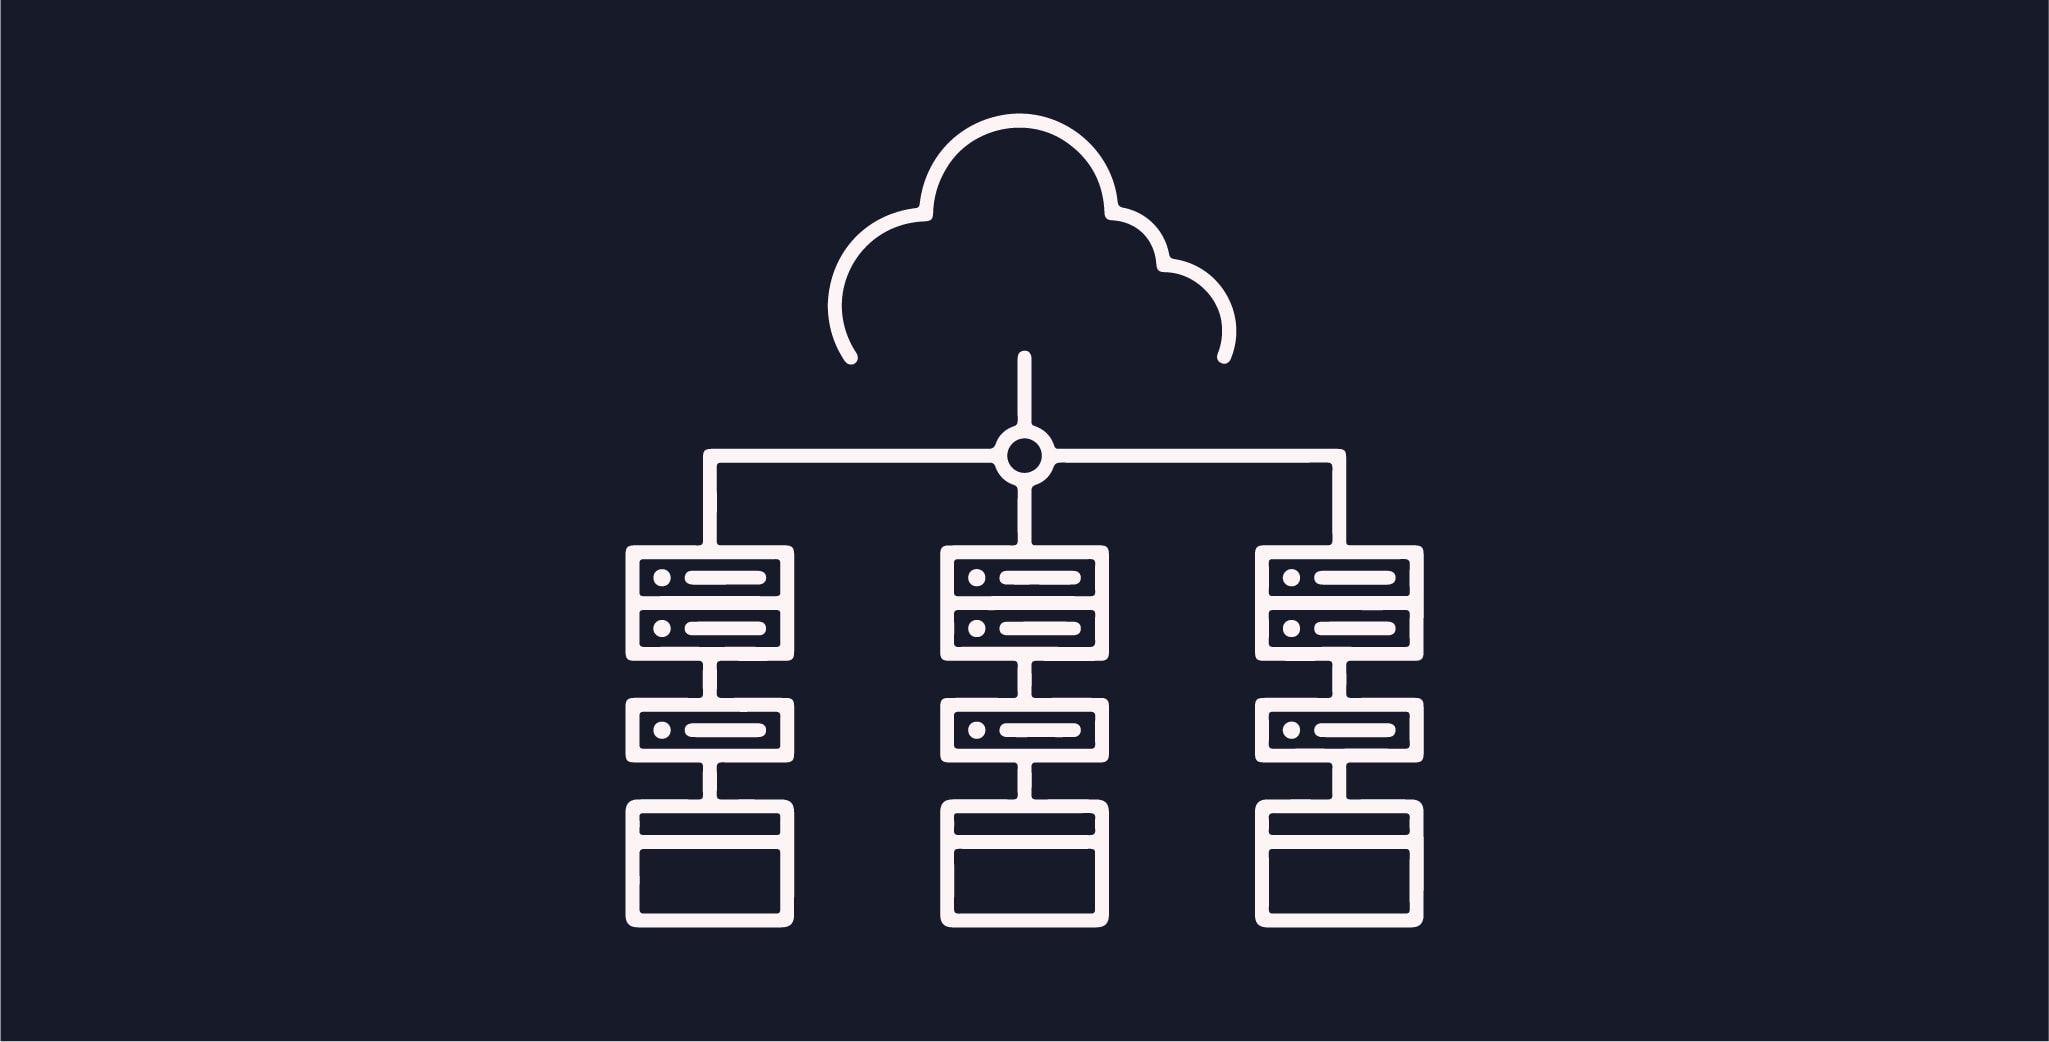 Hero image with illustration of cloud VPS